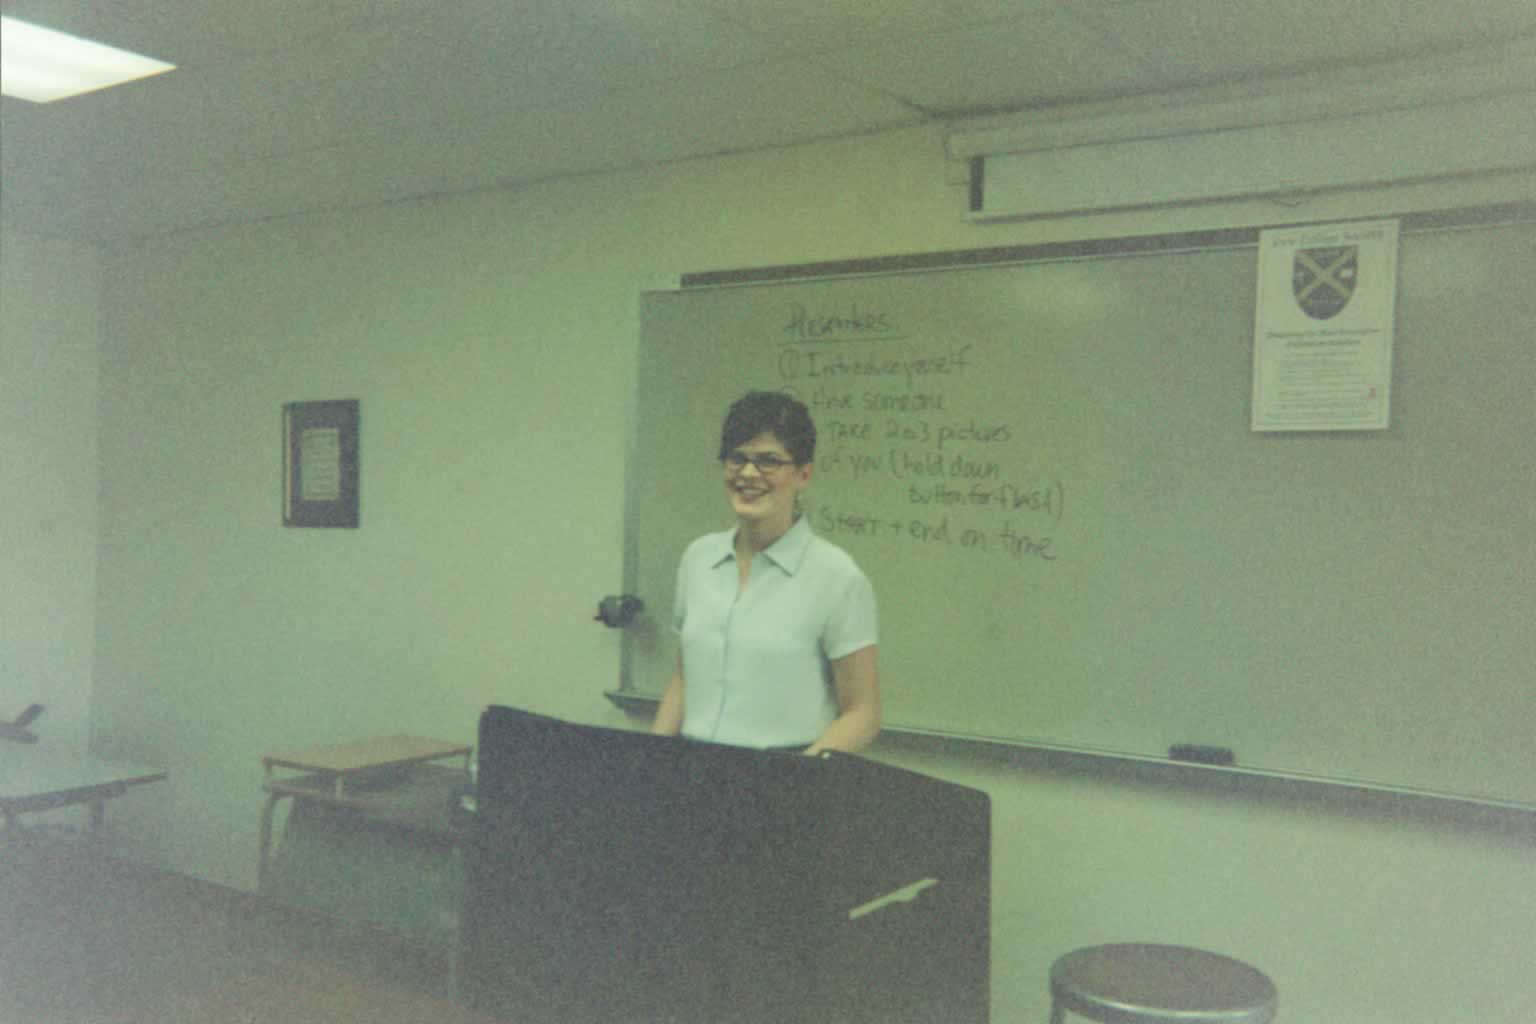 picture of a woman smiling behind a podium in a classroom